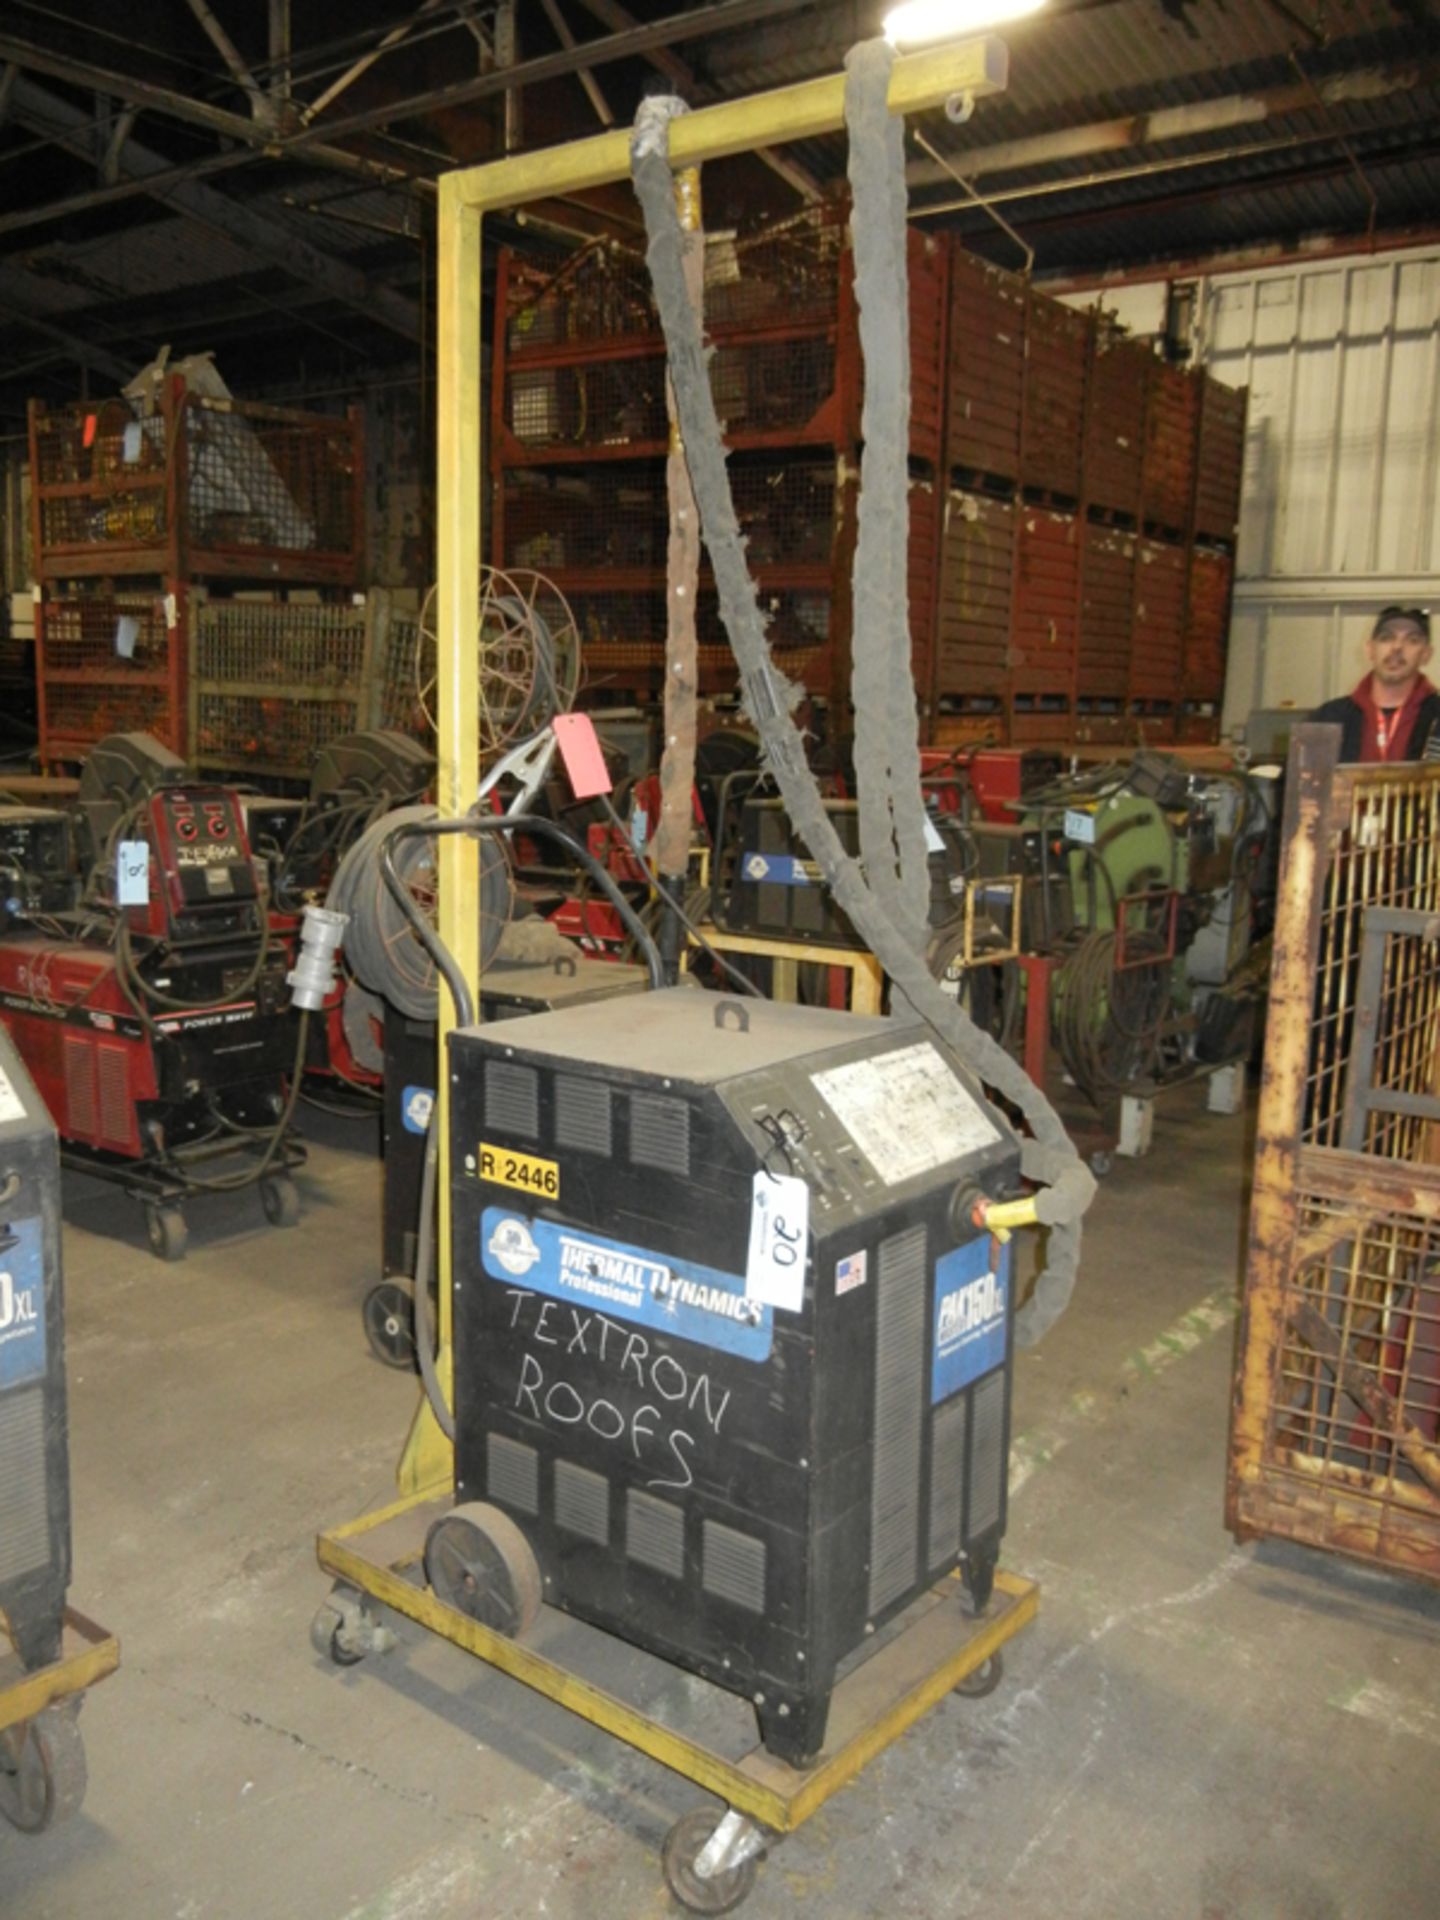 Thermal Dynamics PAK150XL Plasma Cutting System on portable cart with boom (2007)